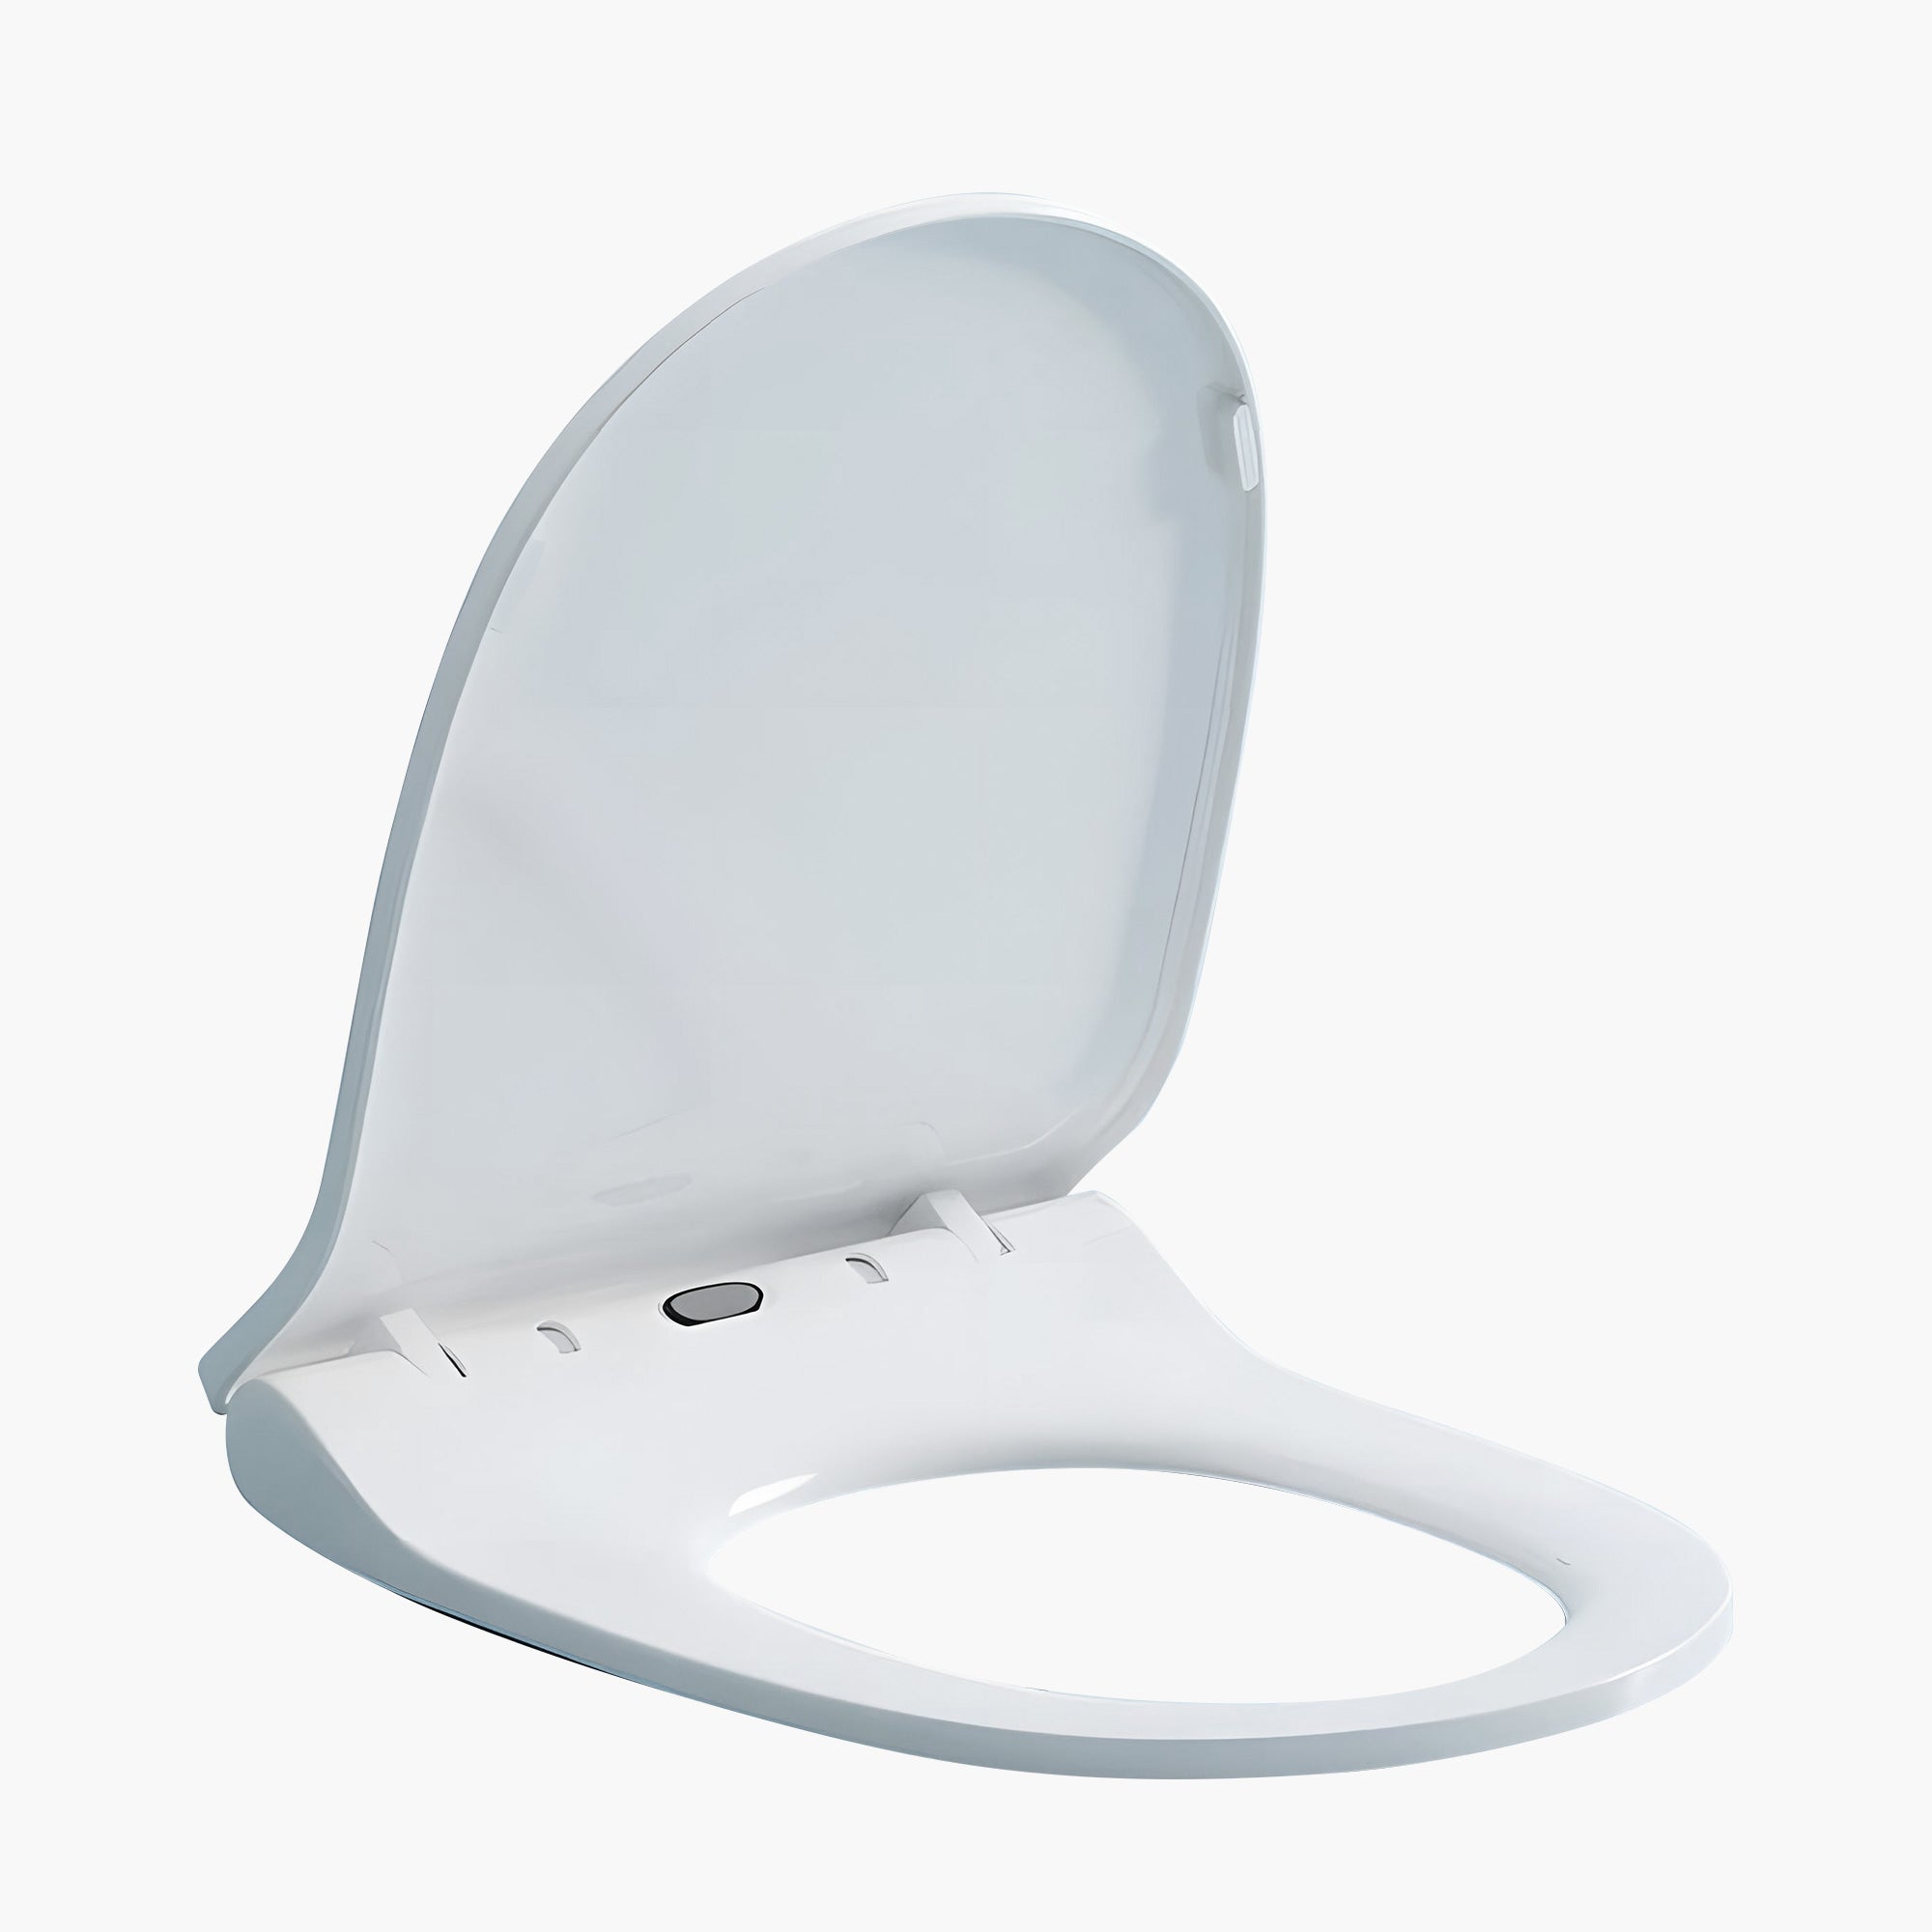 HOROW Round toilet seat With PP Material HWPP-8733-B